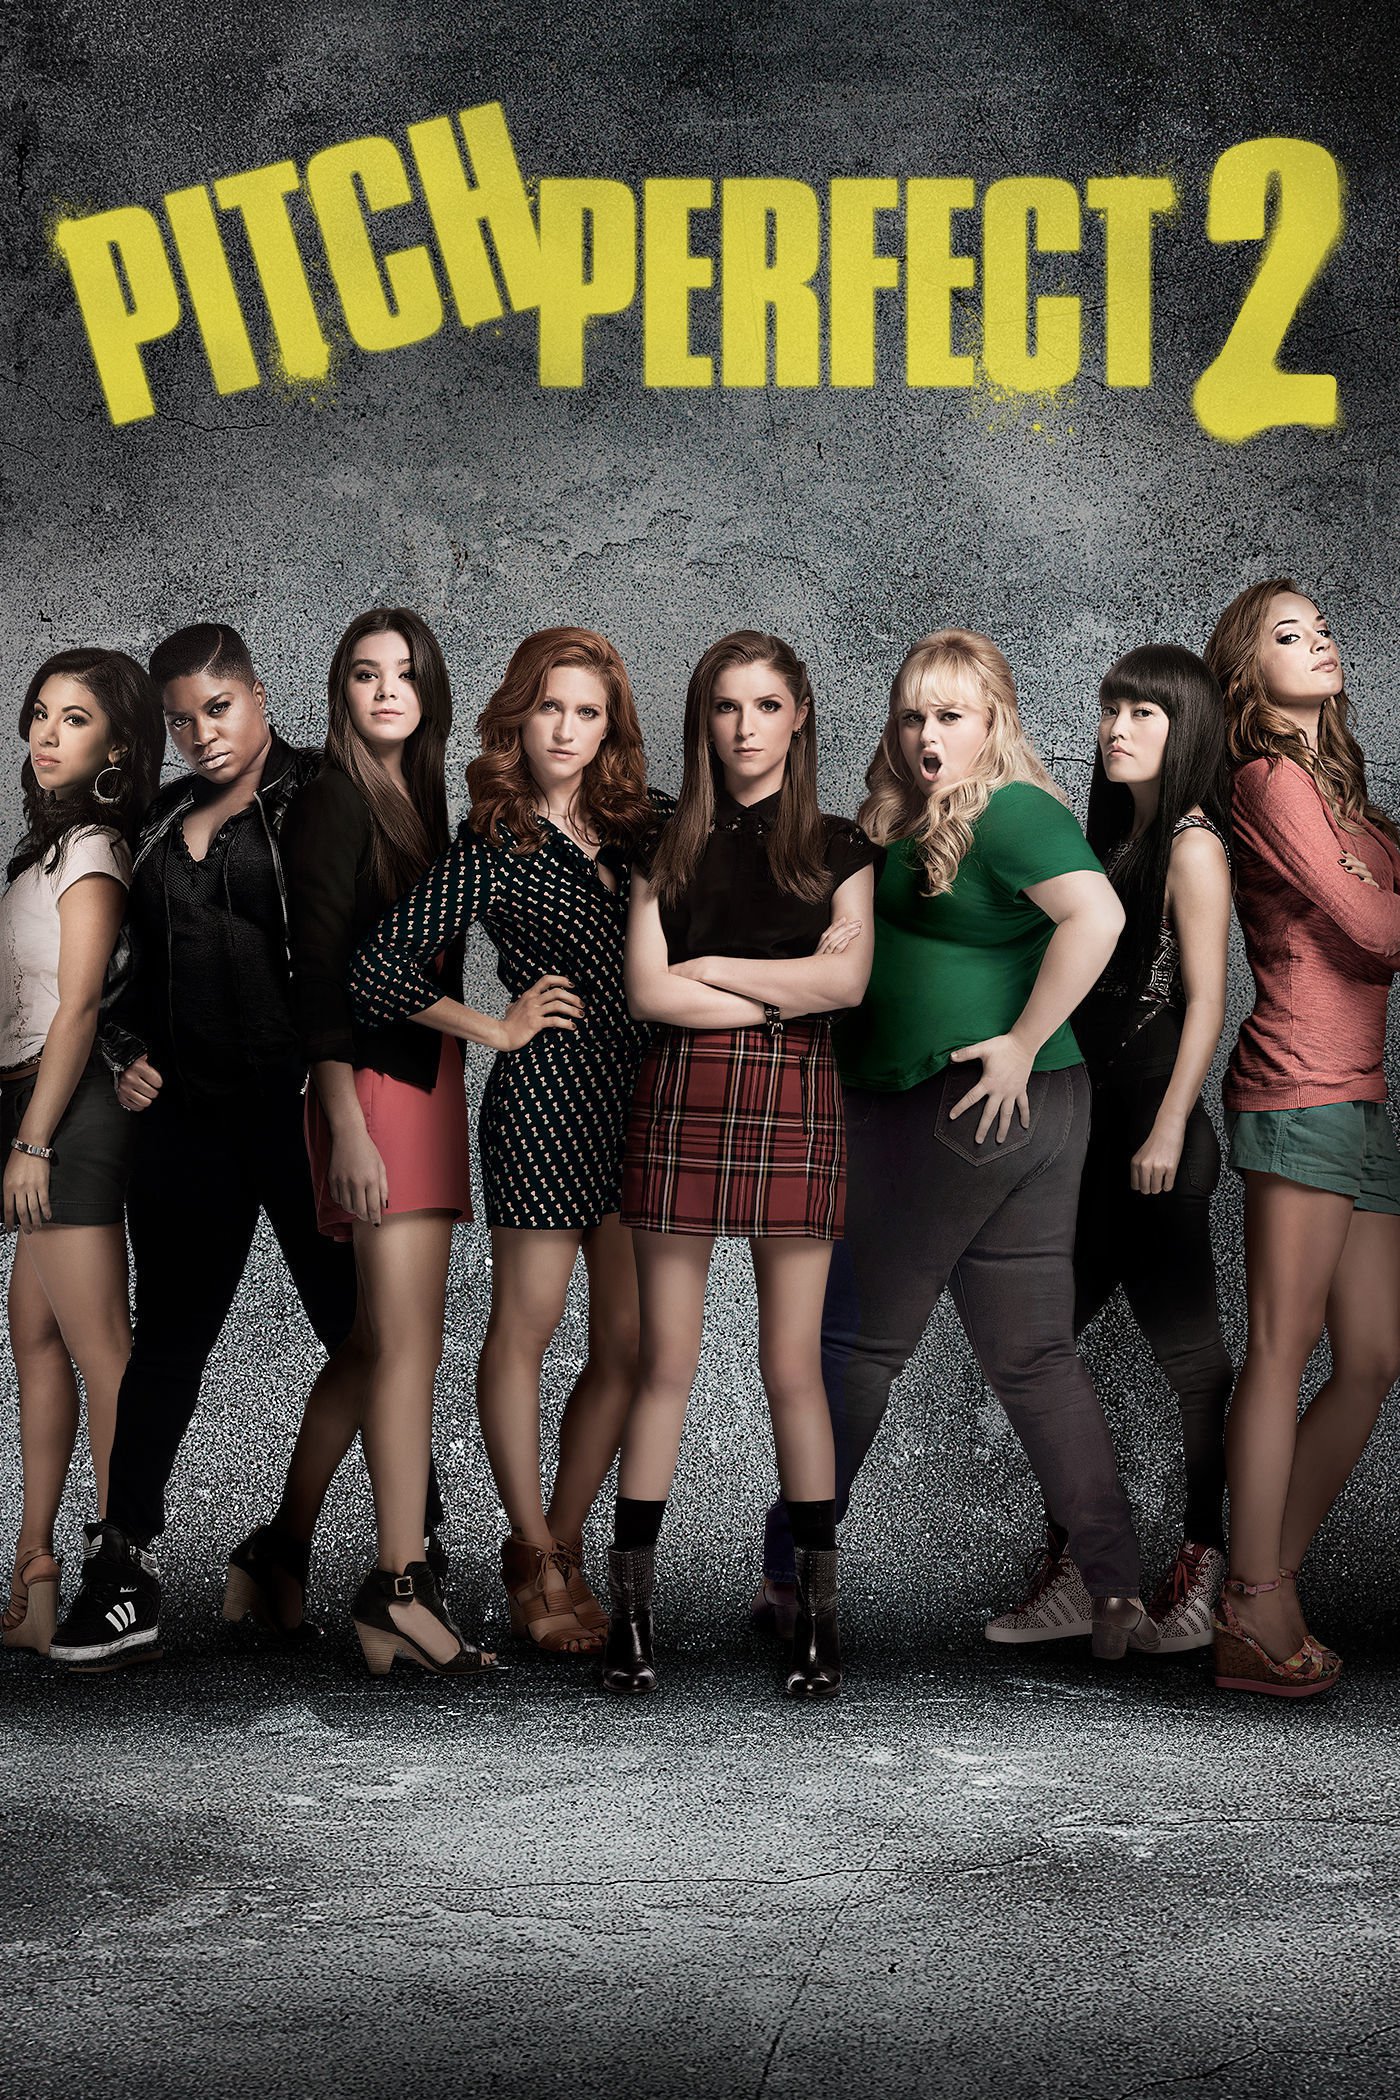 pitchperfect torrent